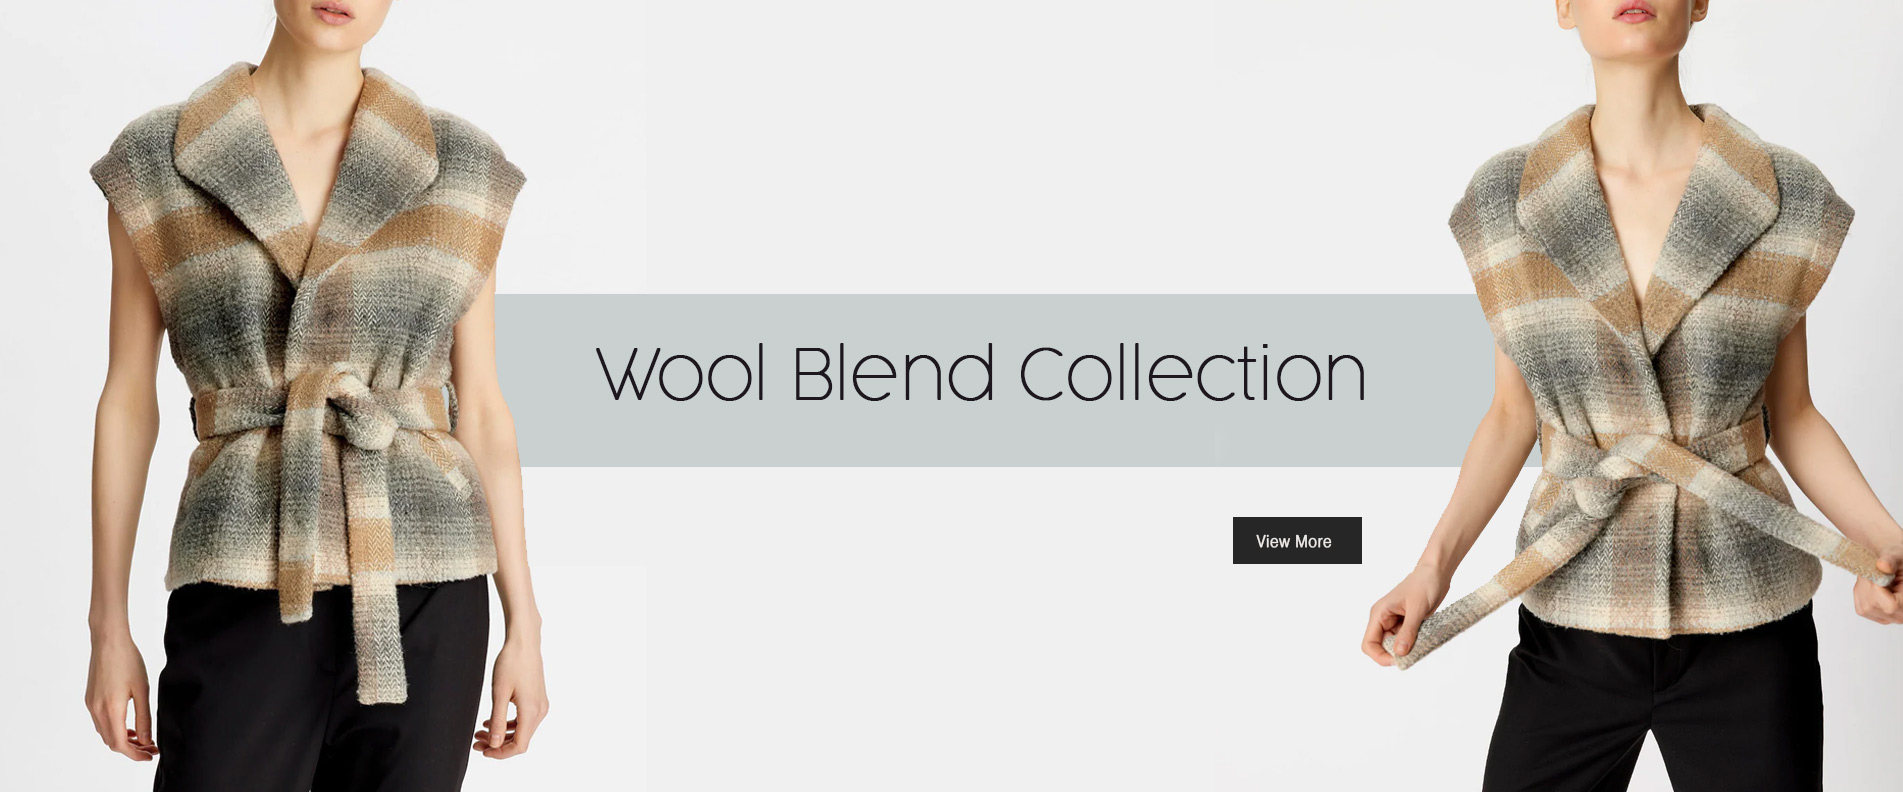 Wool Blend Collection